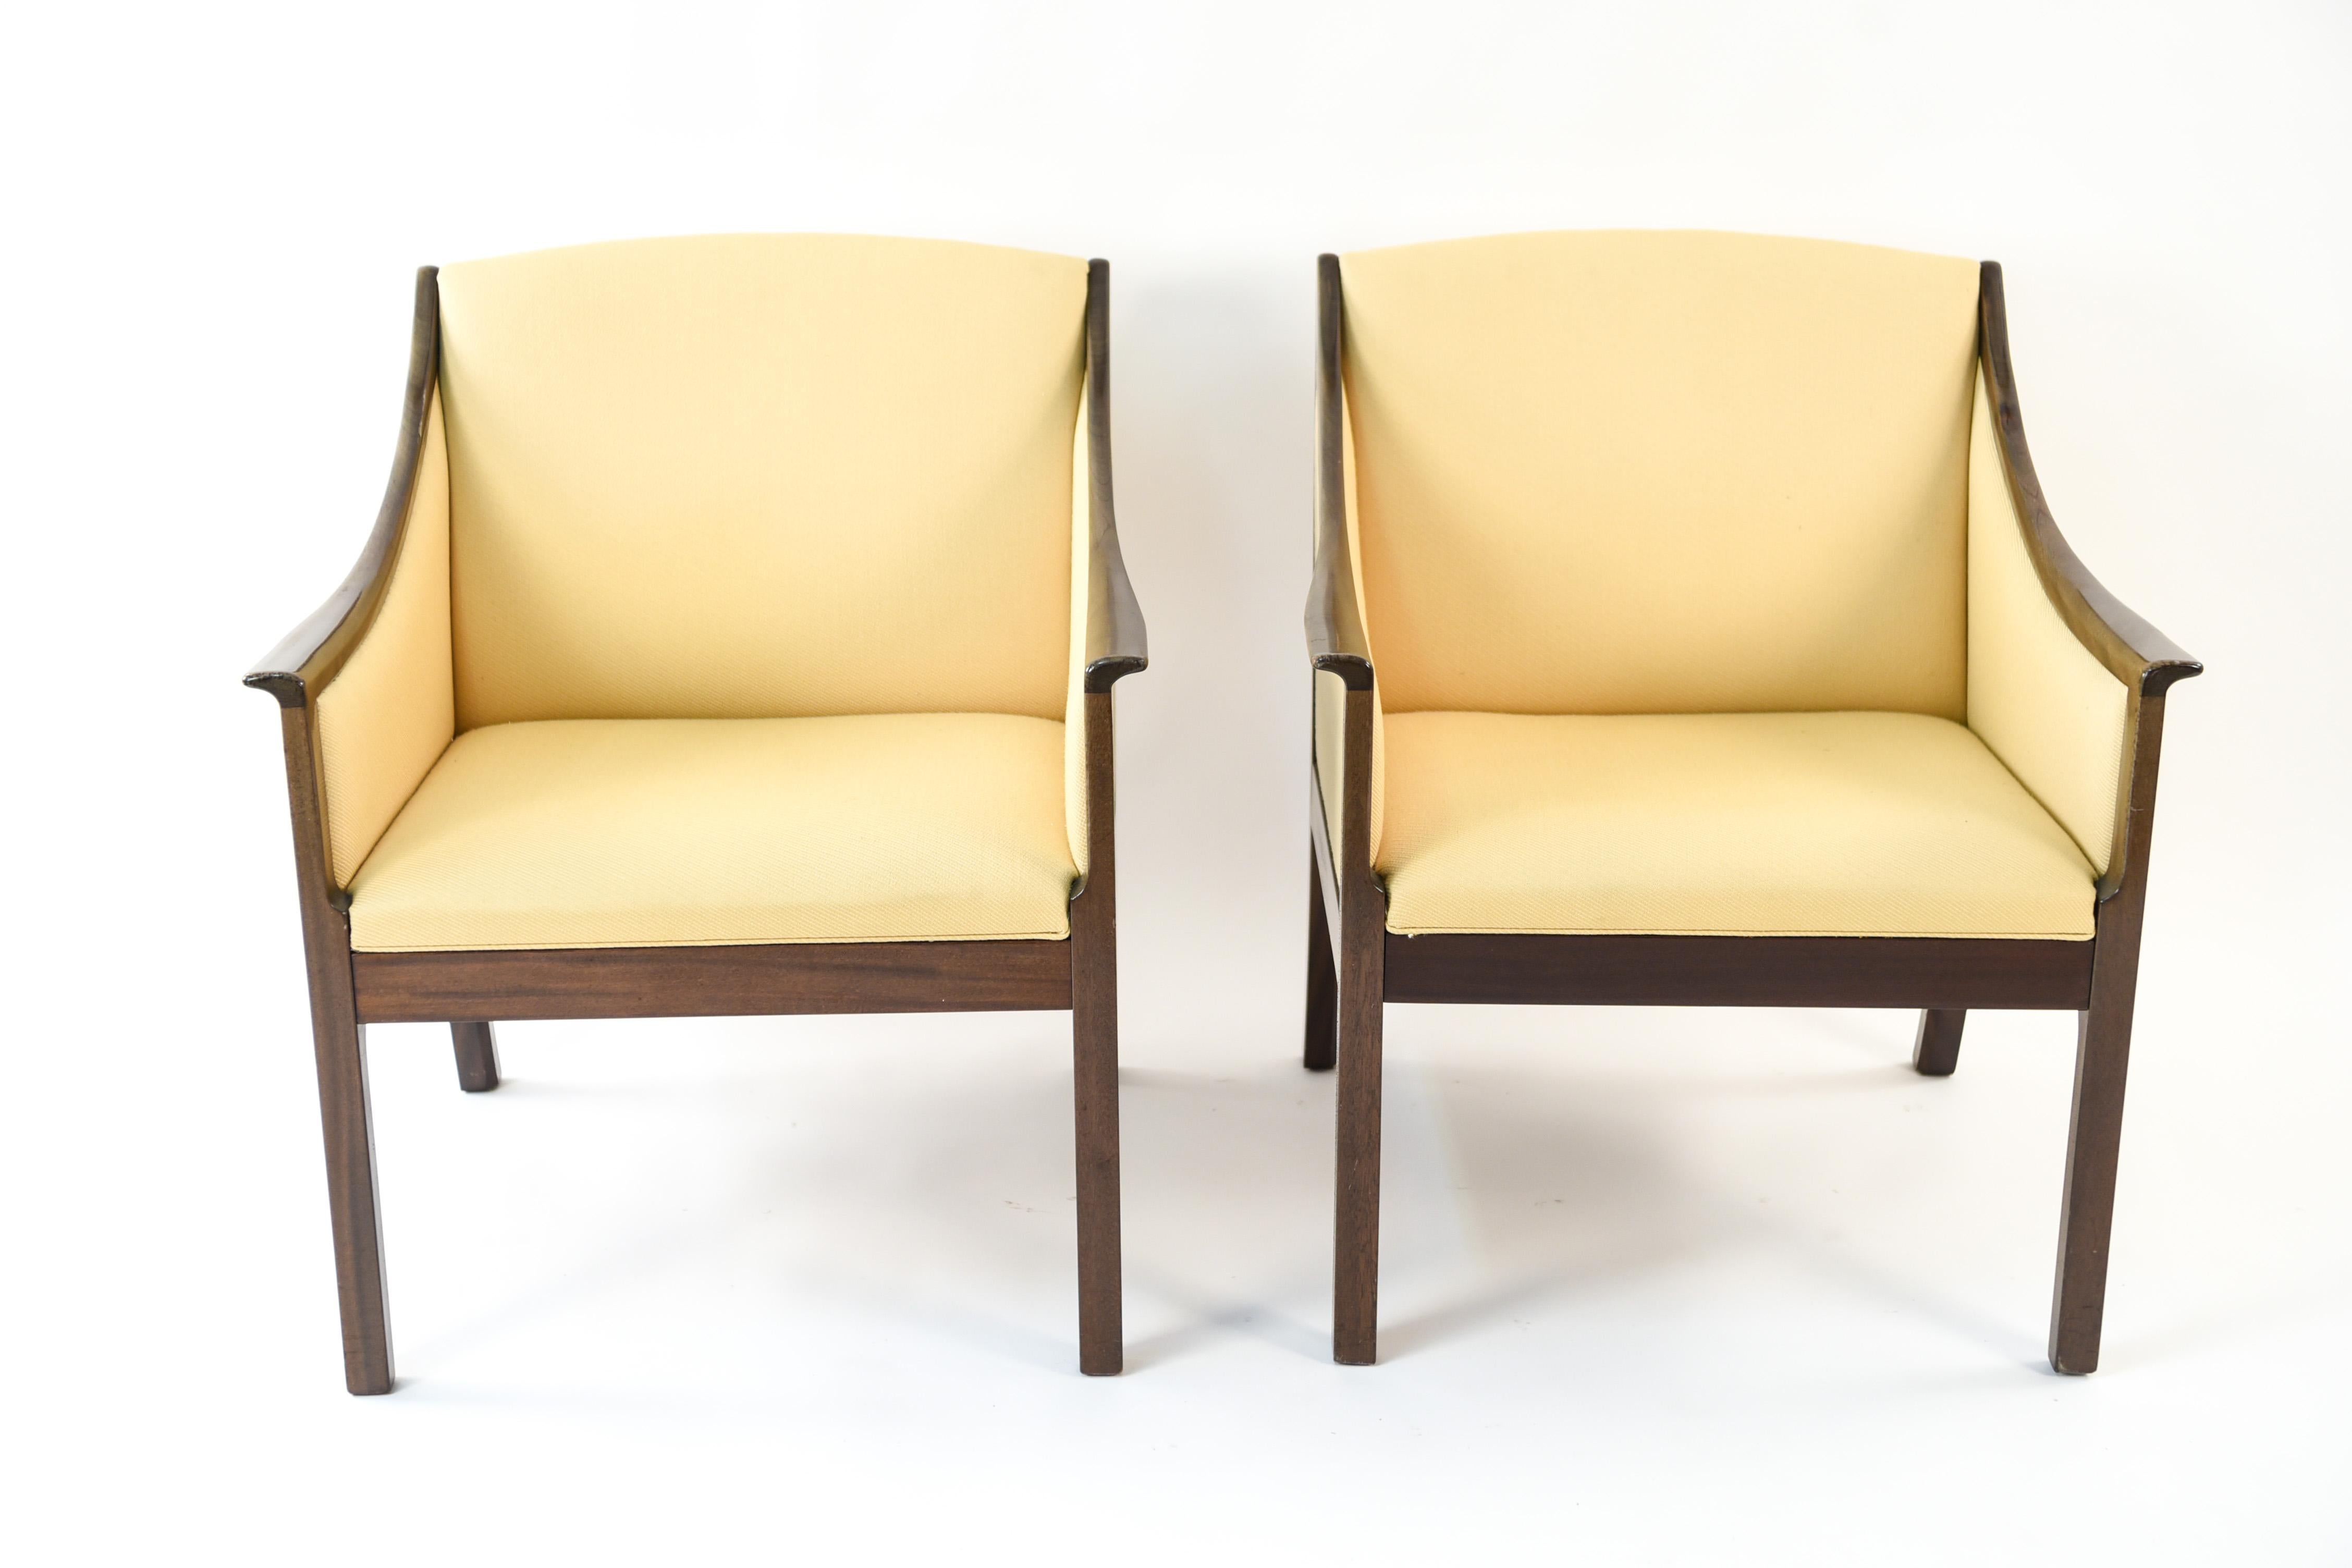 Mid-Century Modern Ole Wanscher for Poul Jeppesen Pair of Mahogany Lounge Chairs